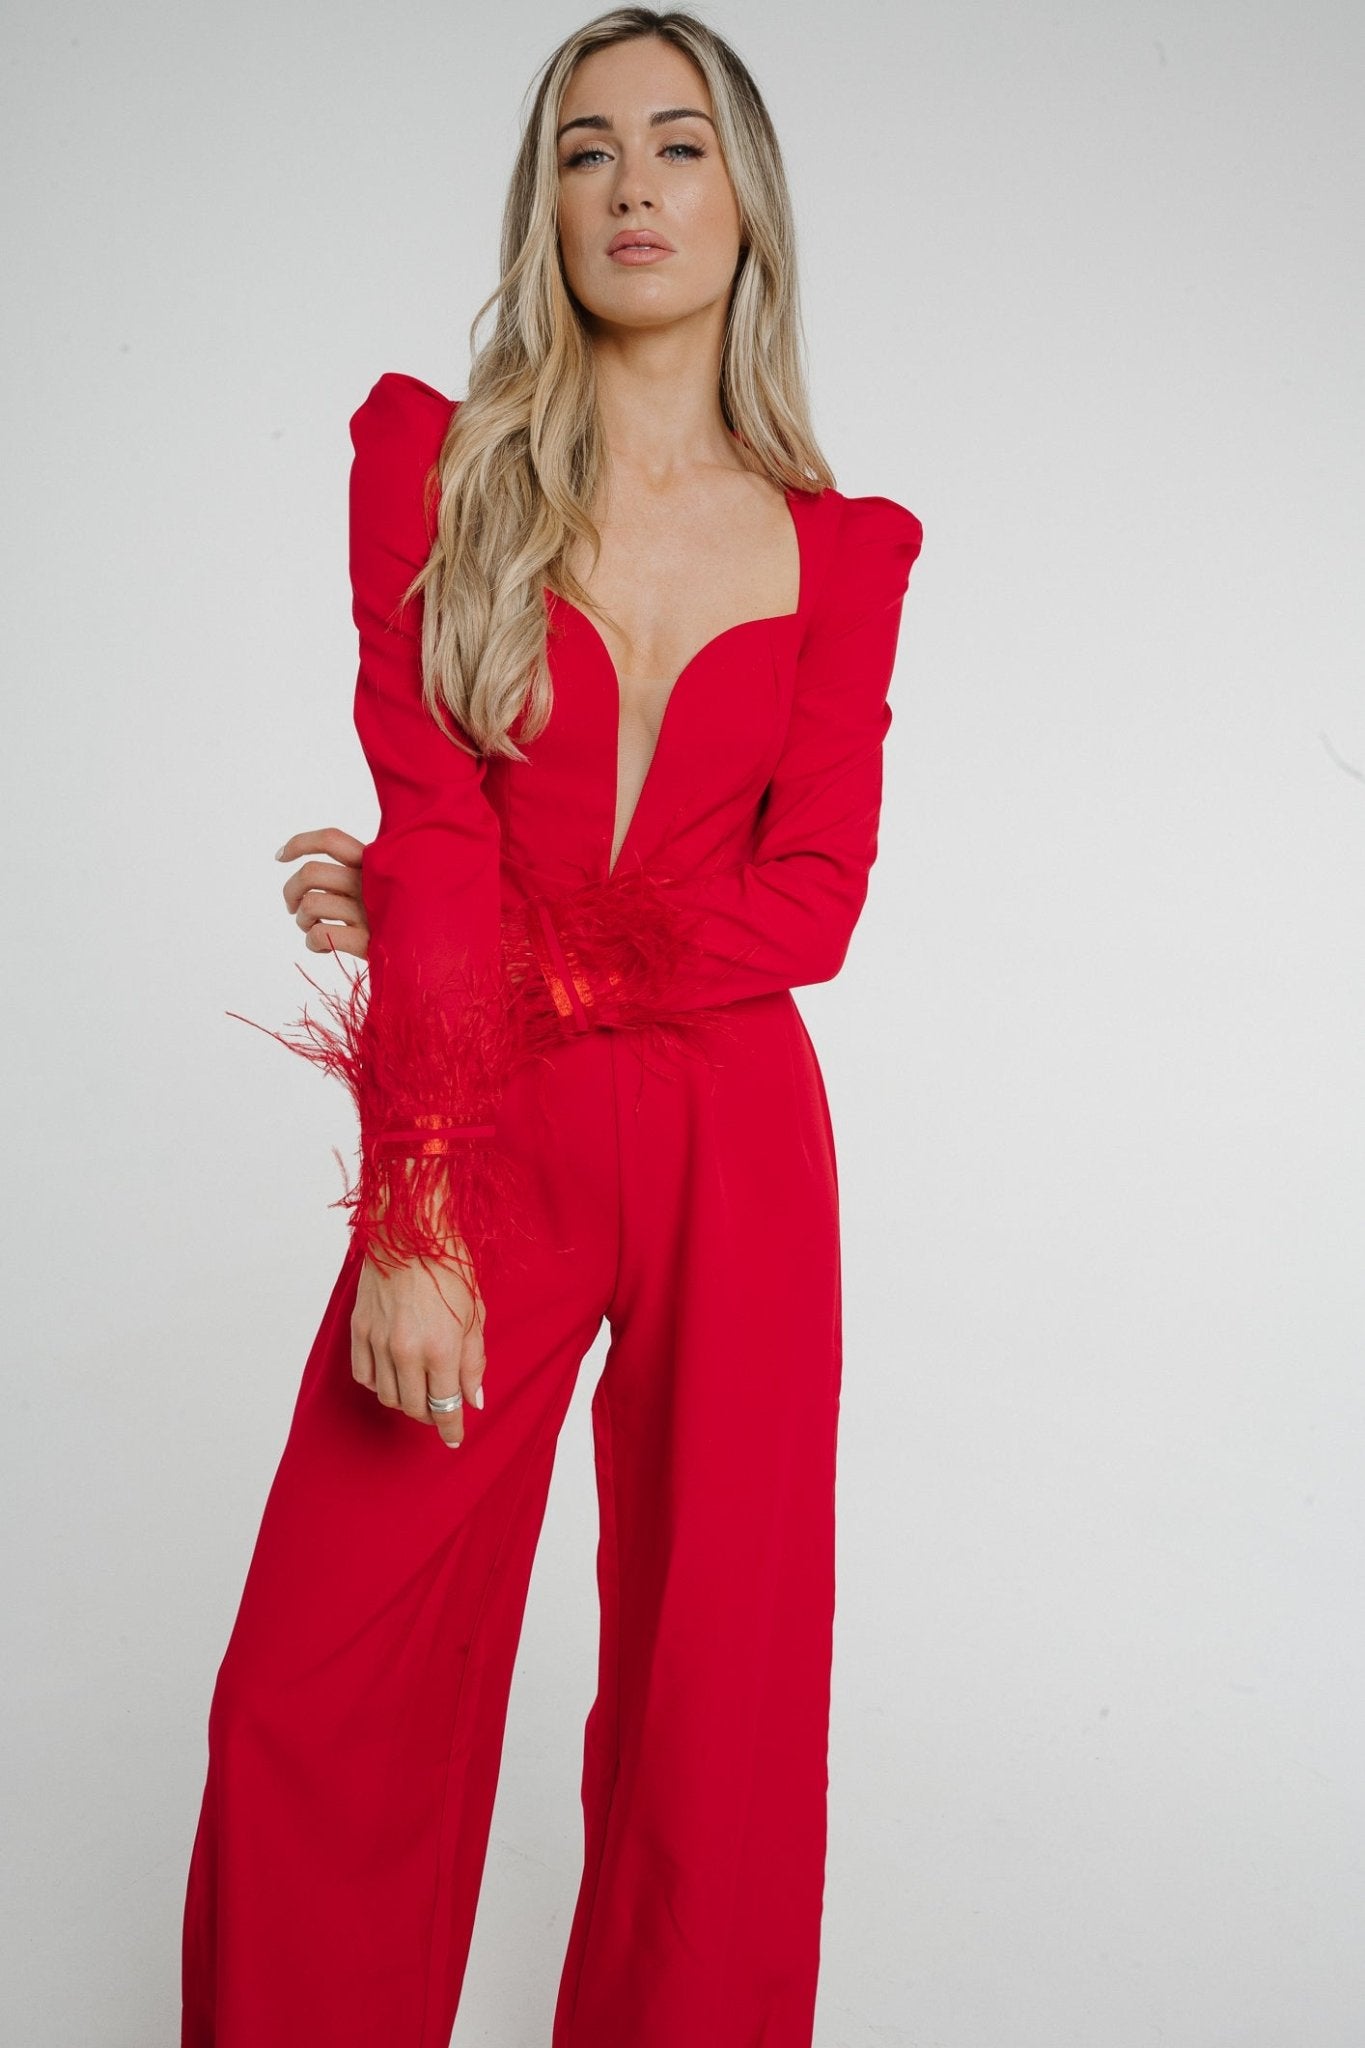 Holly Feather Trim Jumpsuit In Red - The Walk in Wardrobe